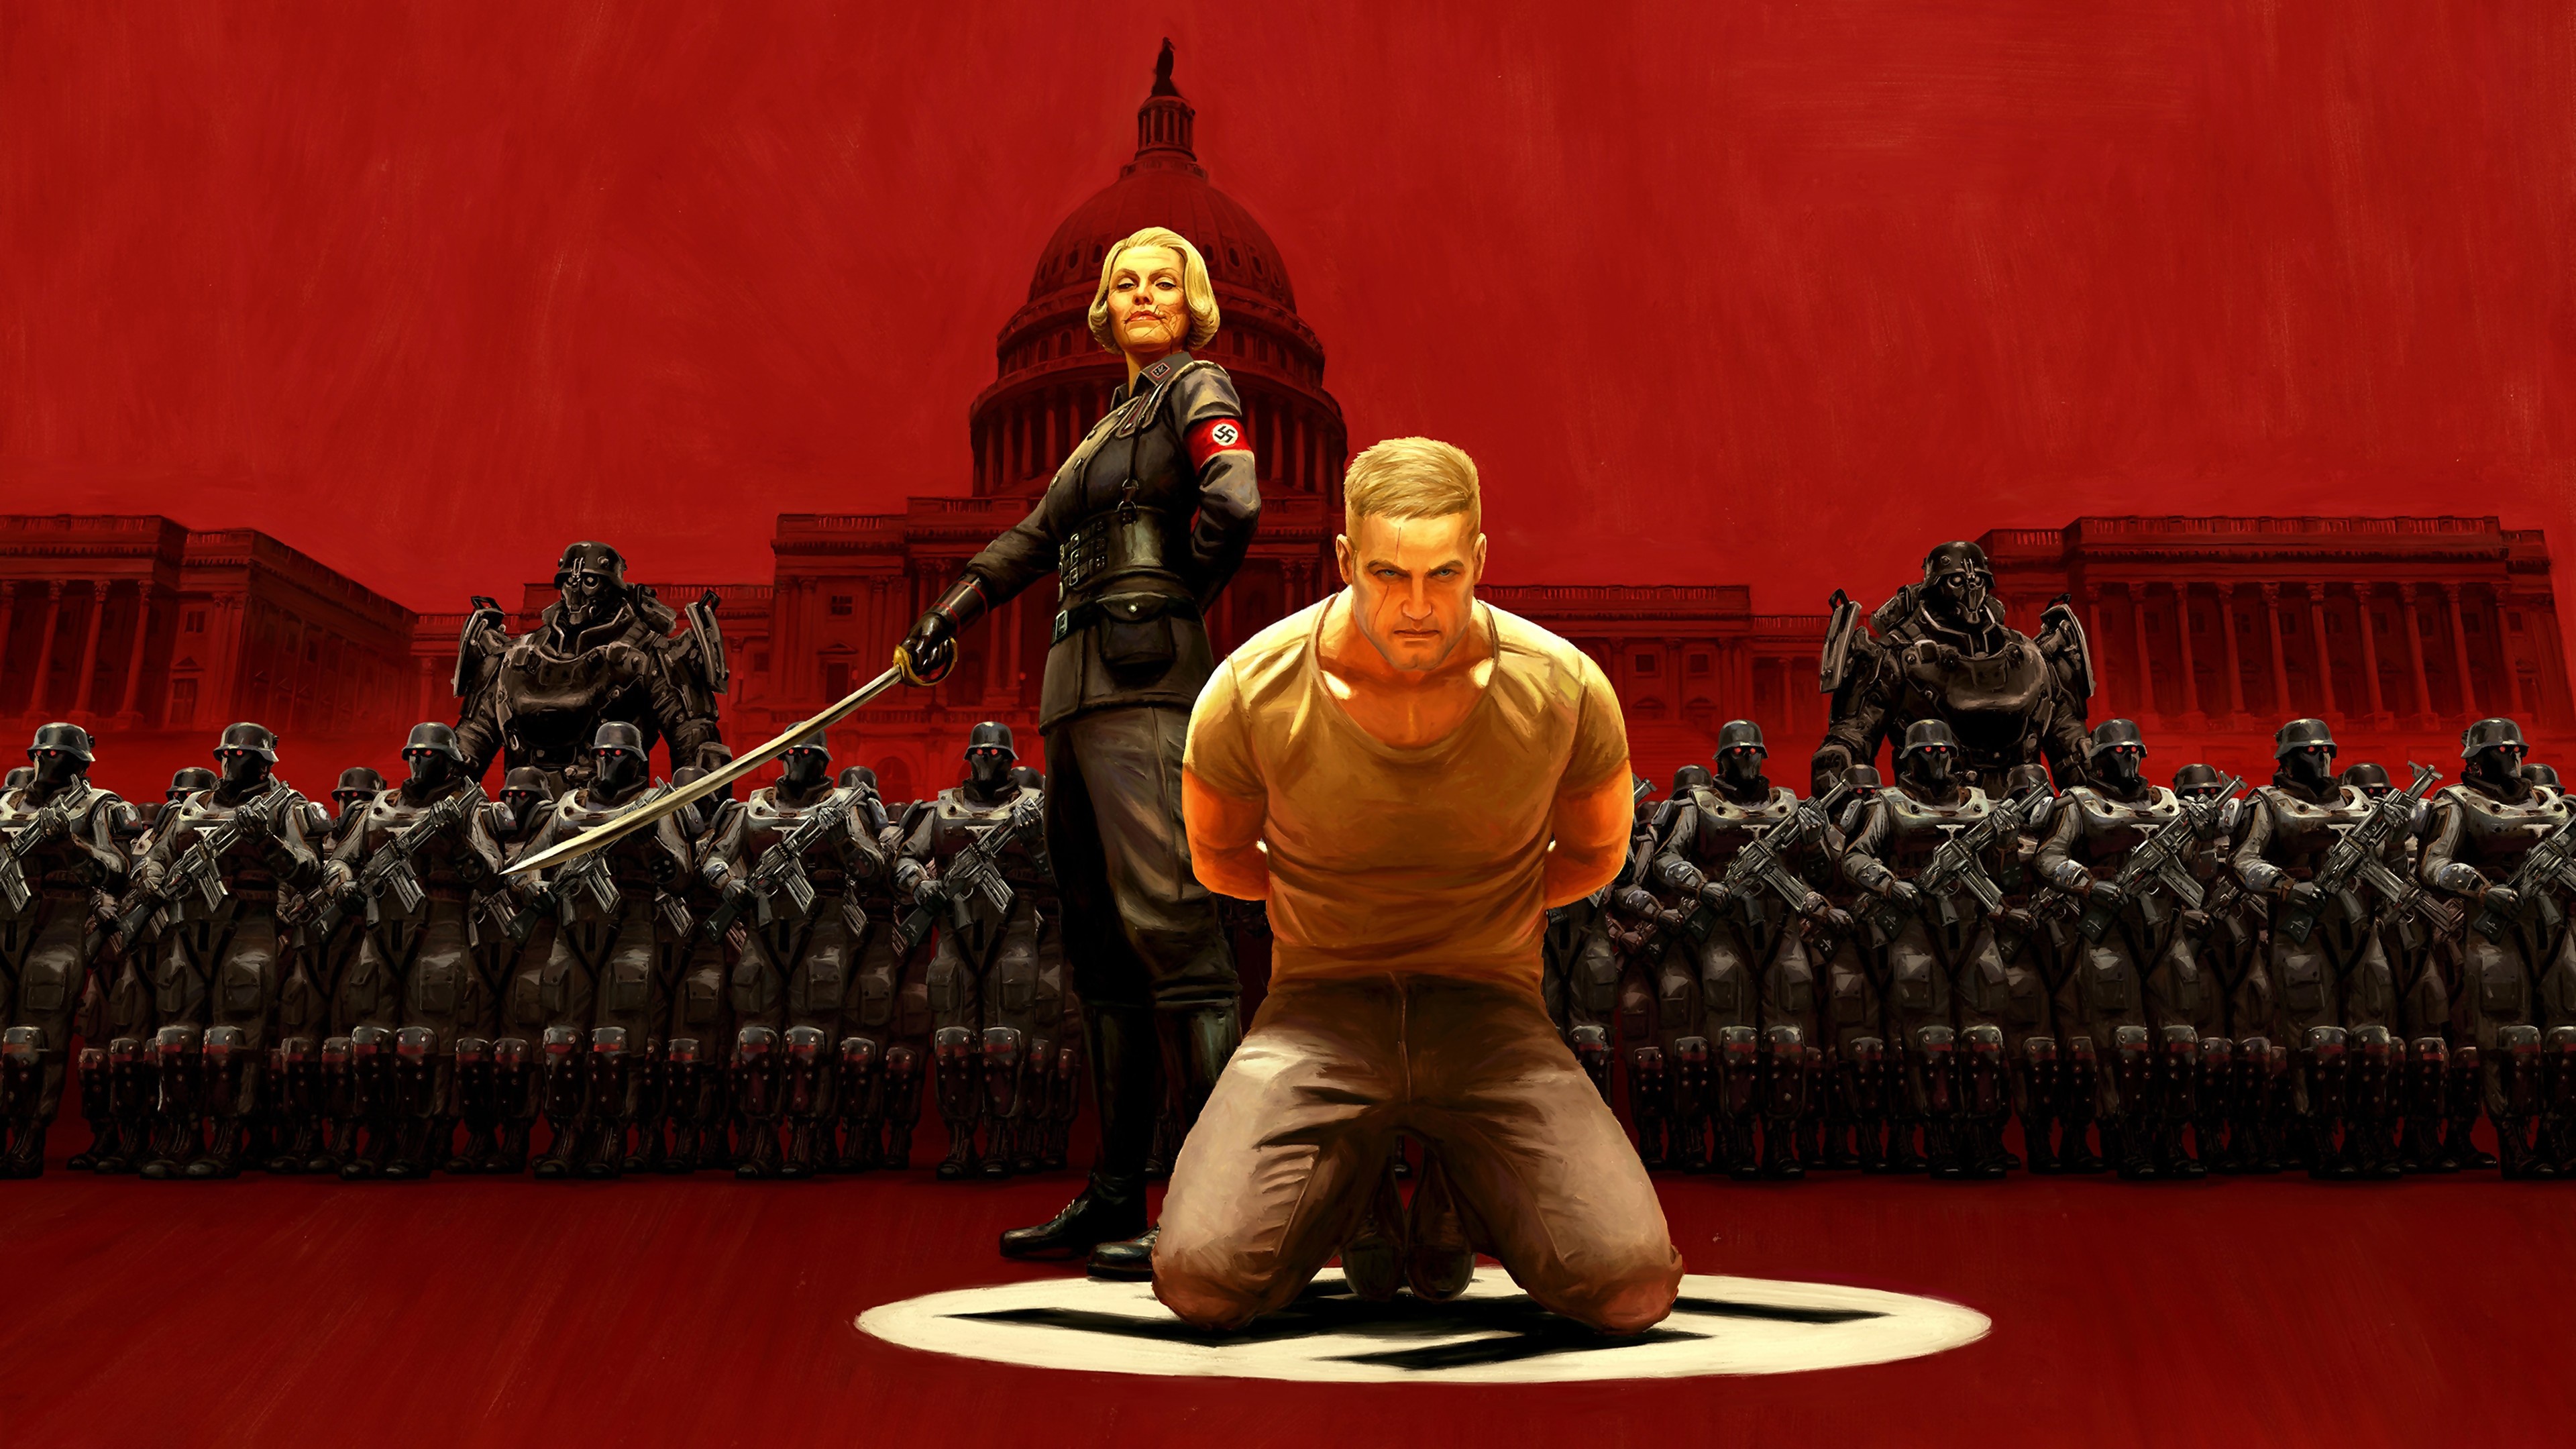 Wolfenstein II: The New Colossus Wallpapers